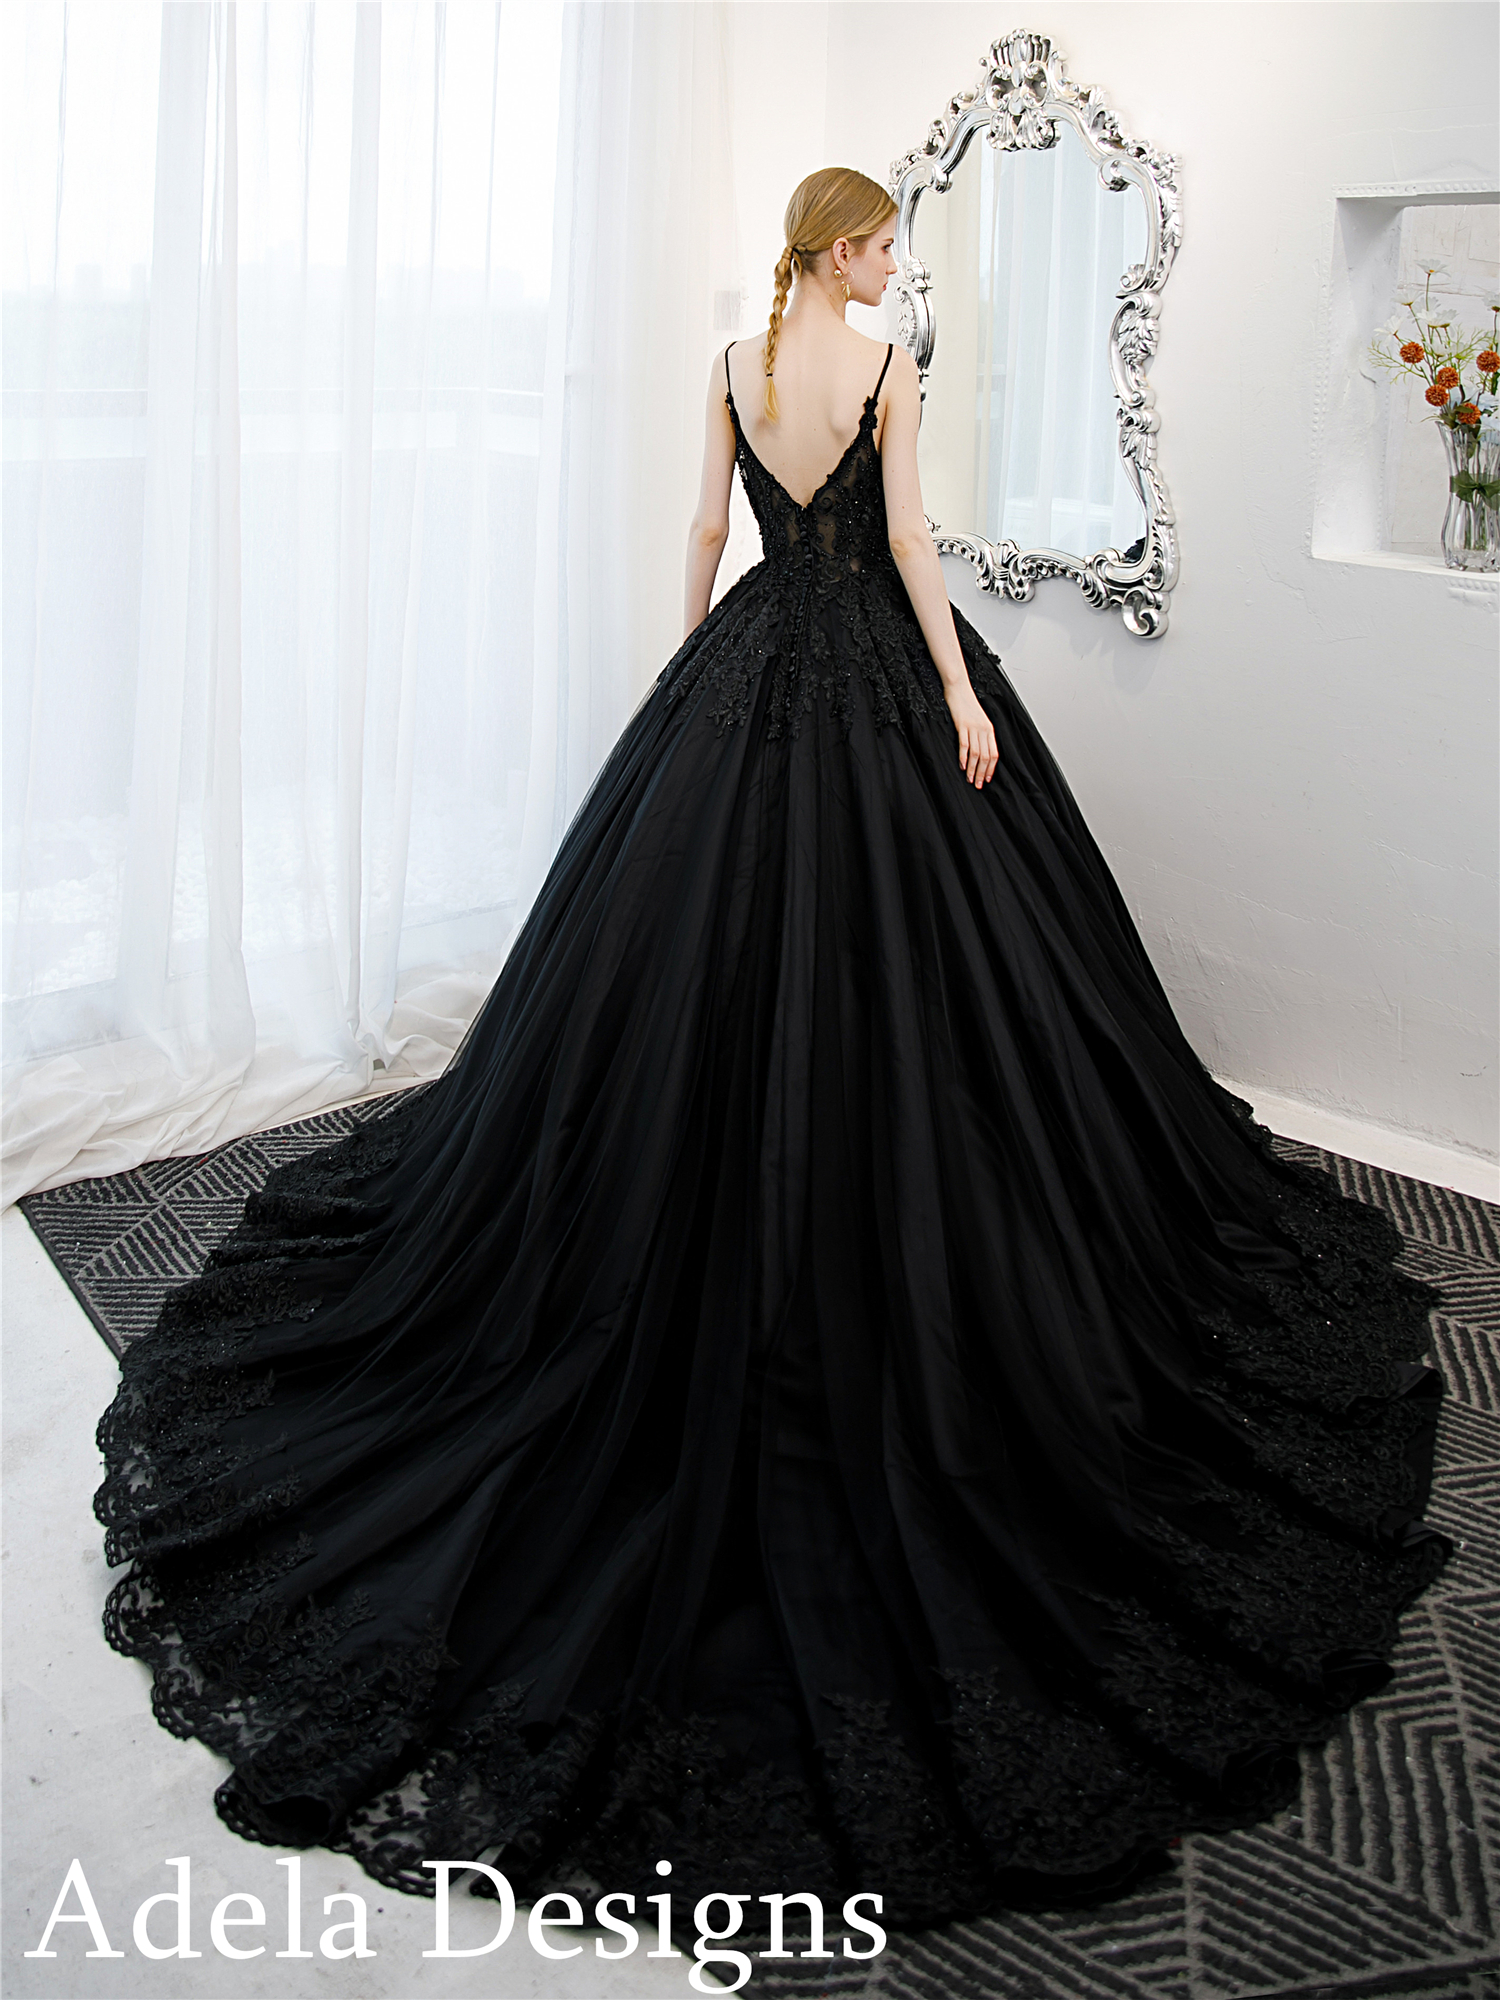 Strapless Ball Gown: Over 33 Royalty-Free Licensable Stock Vectors & Vector  Art | Shutterstock